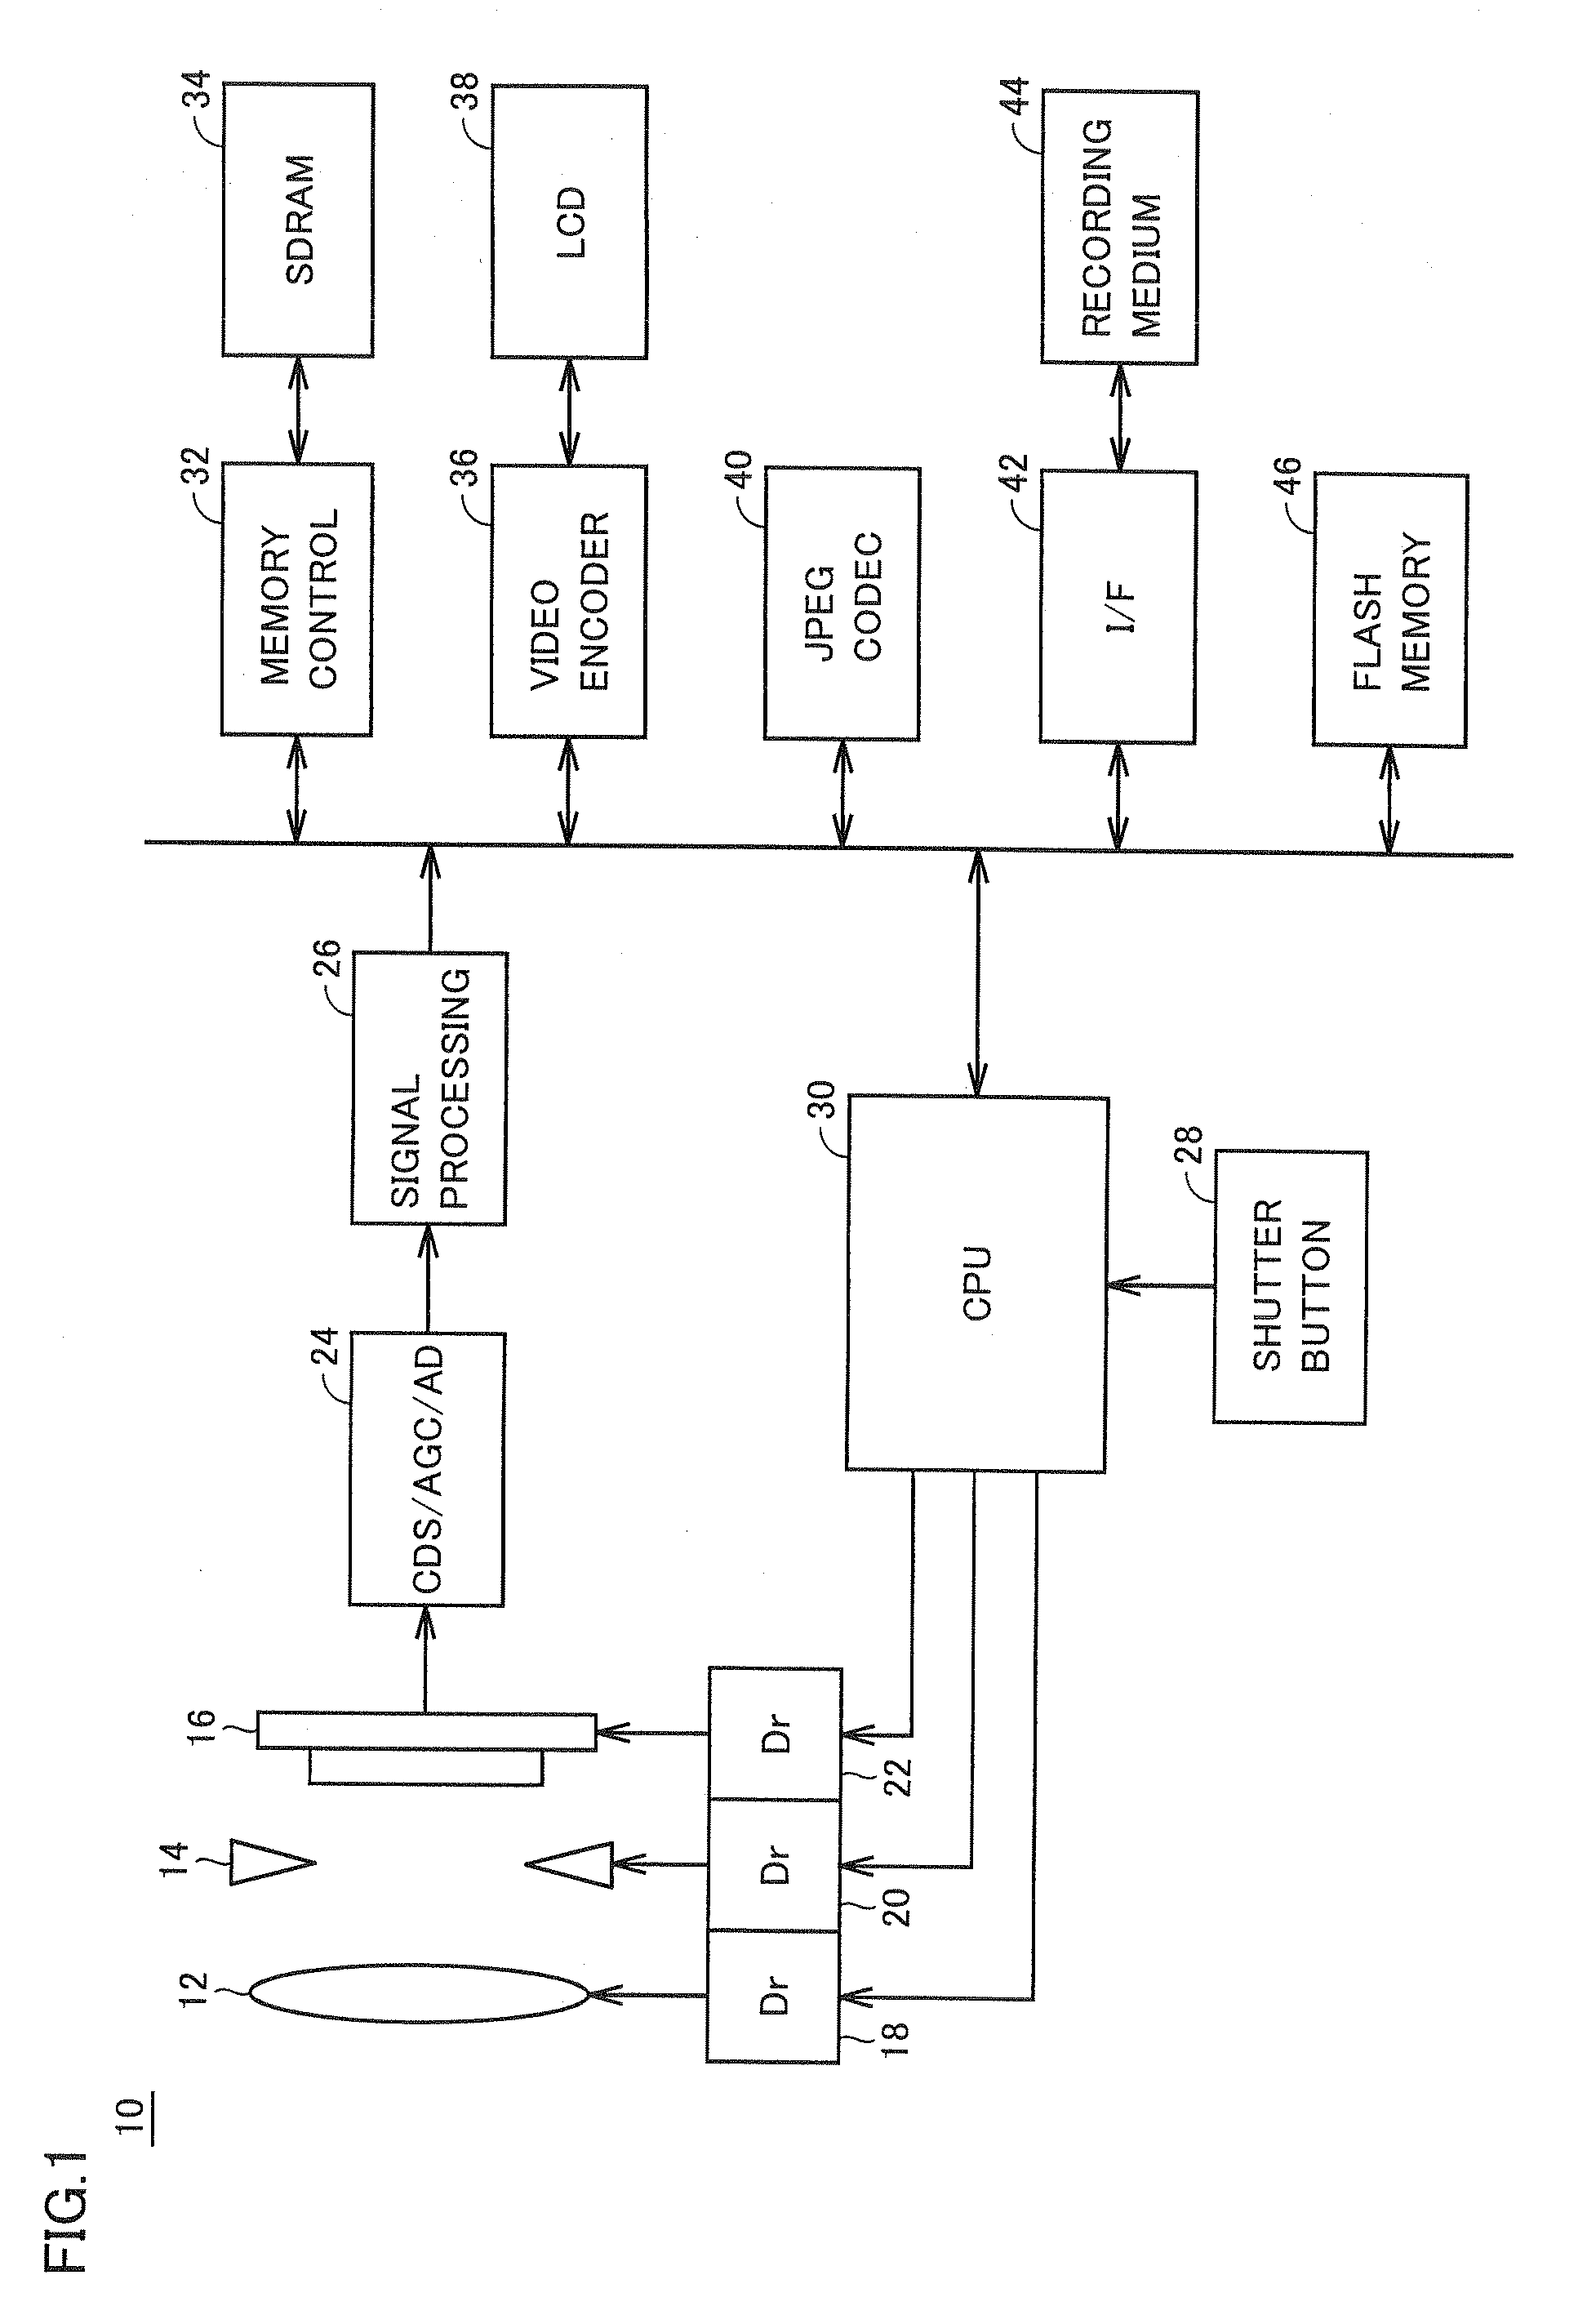 Semiconductor Integrated Circuit Having Normal Mode And Self-Refresh Mode